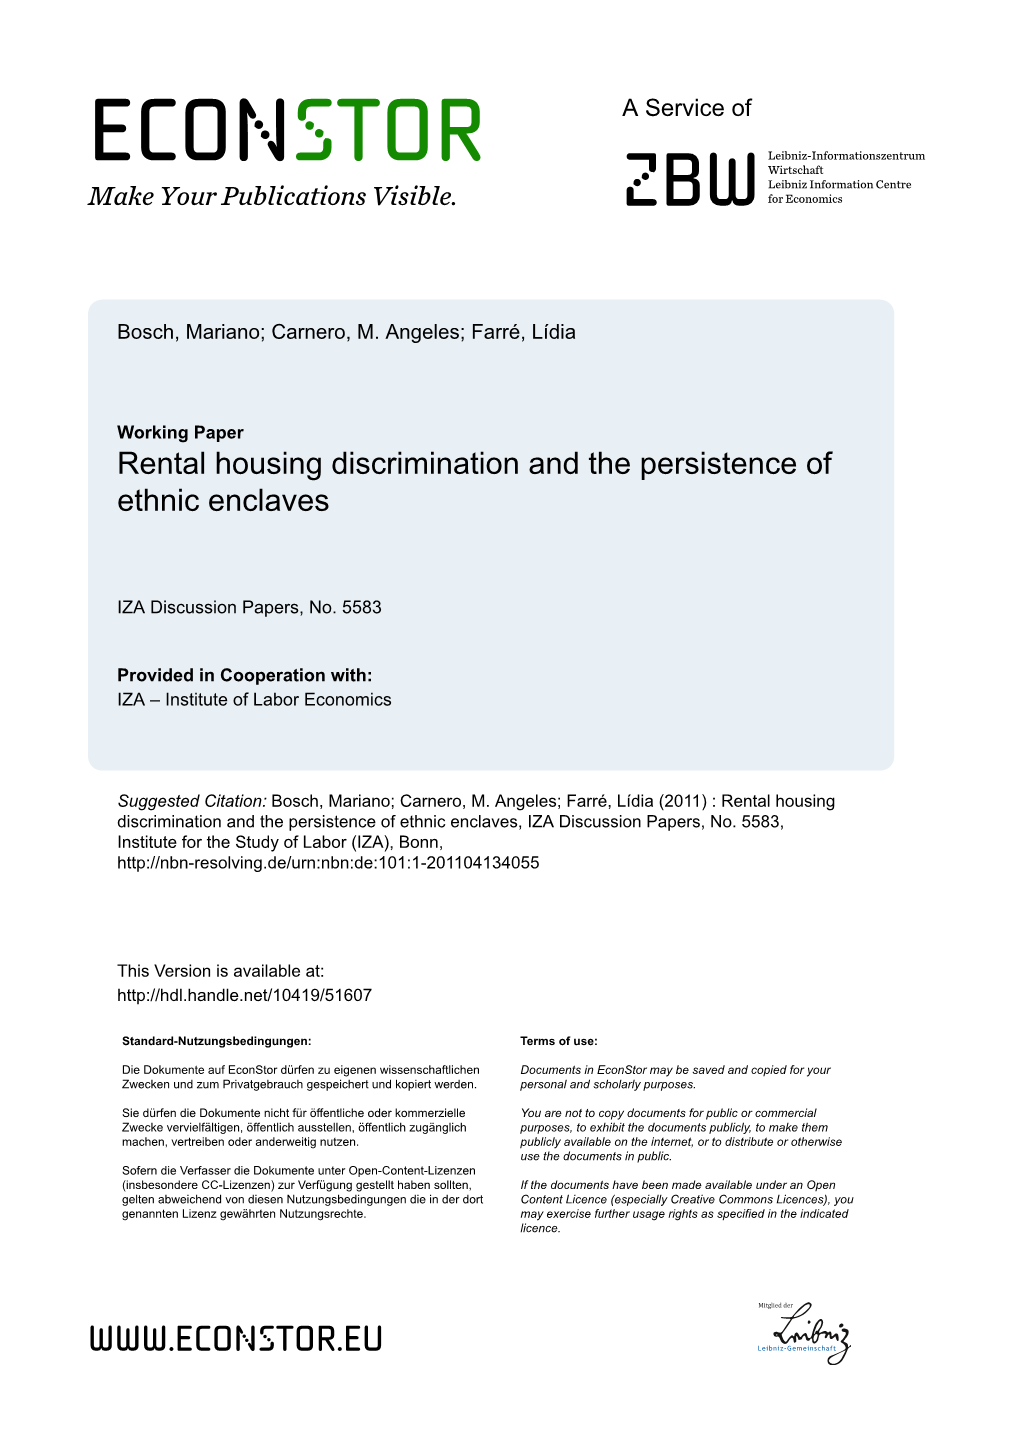 Rental Housing Discrimination and the Persistence of Ethnic Enclaves